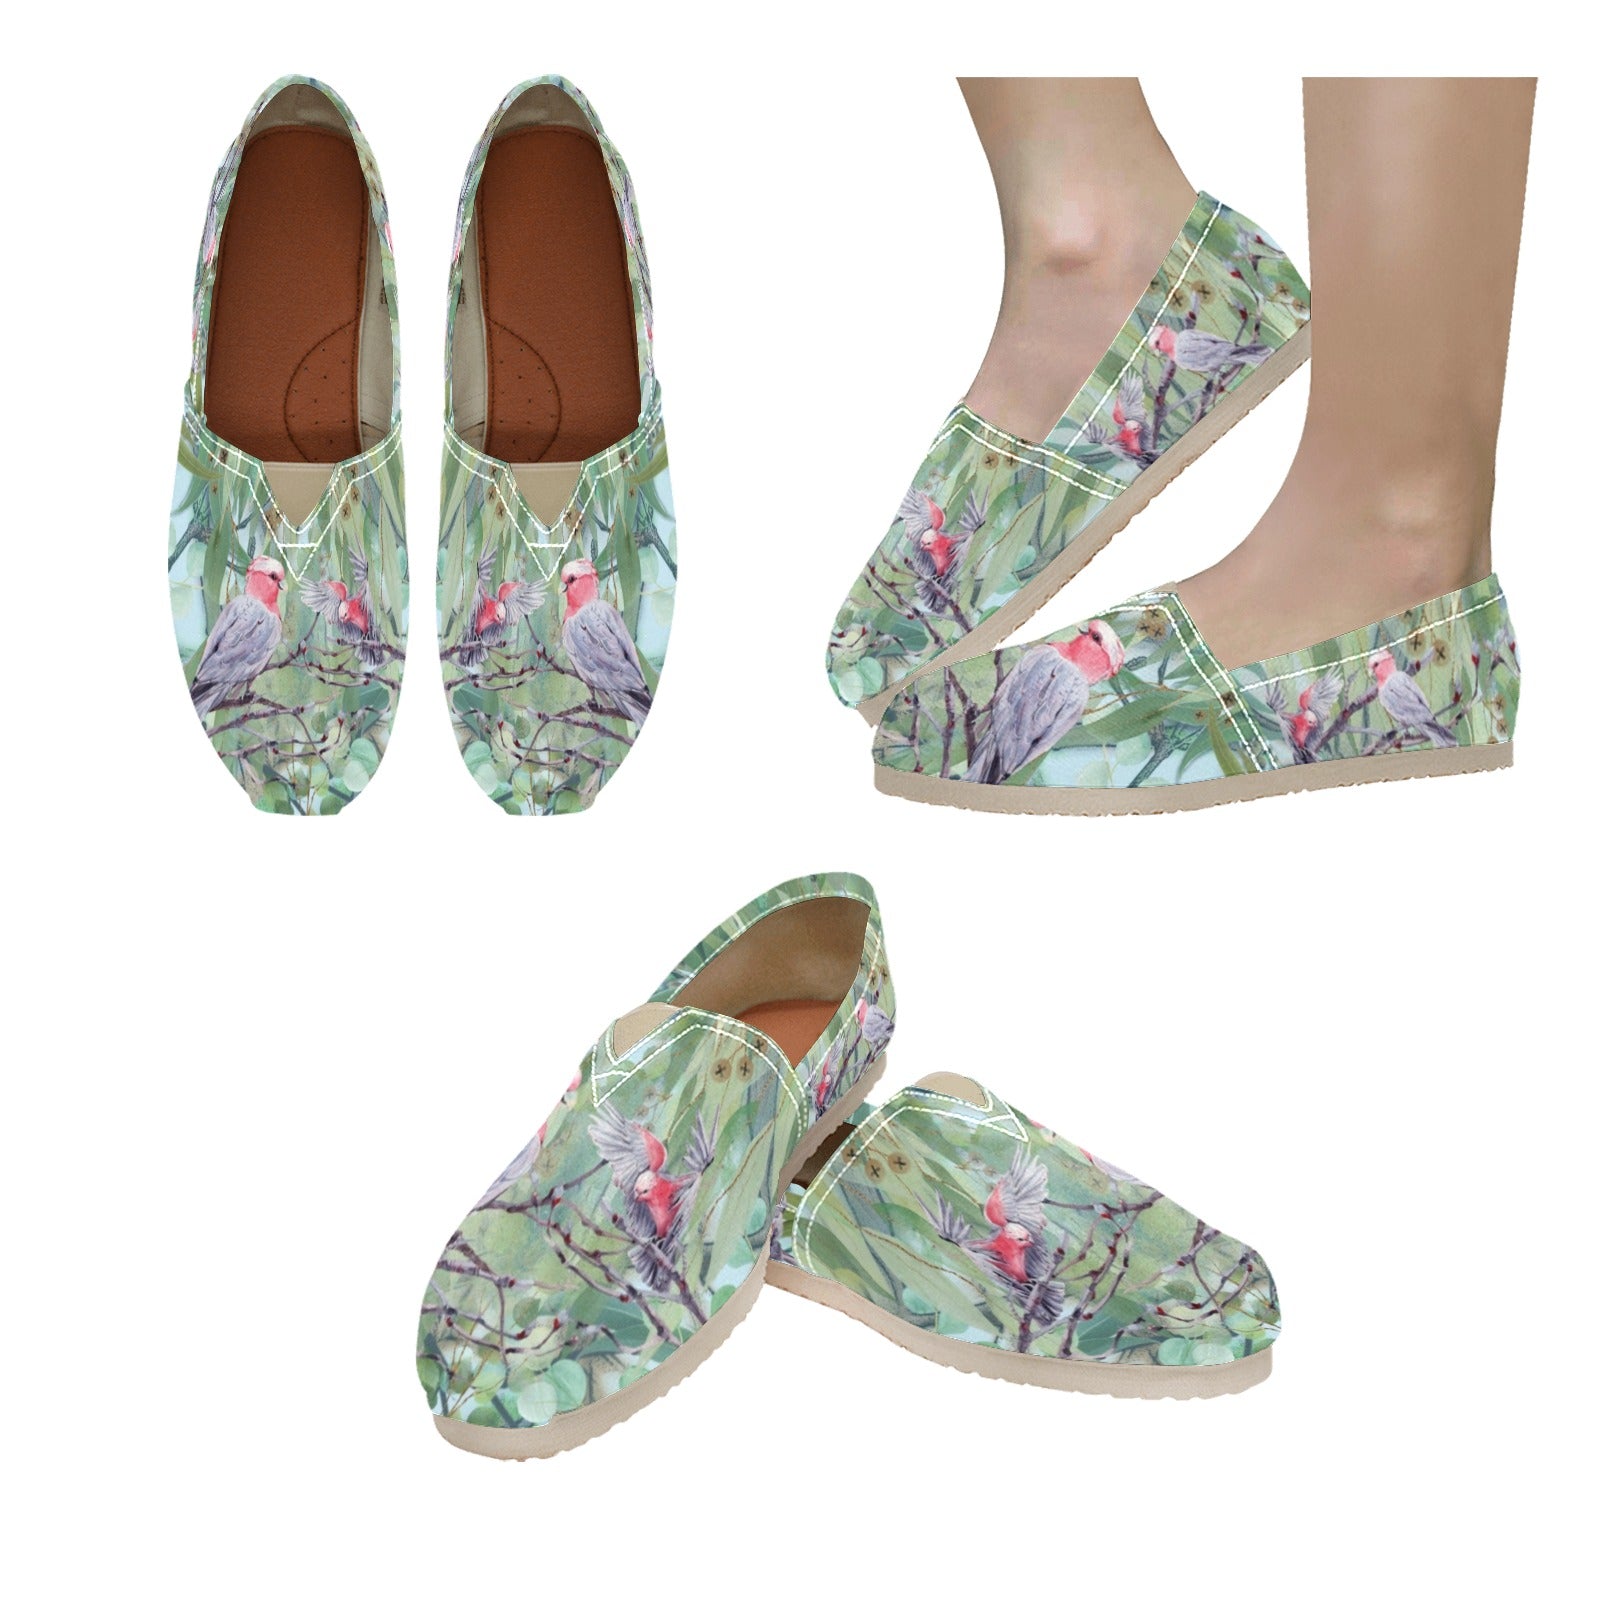 Galah - Casual Canvas Slip-on Shoes